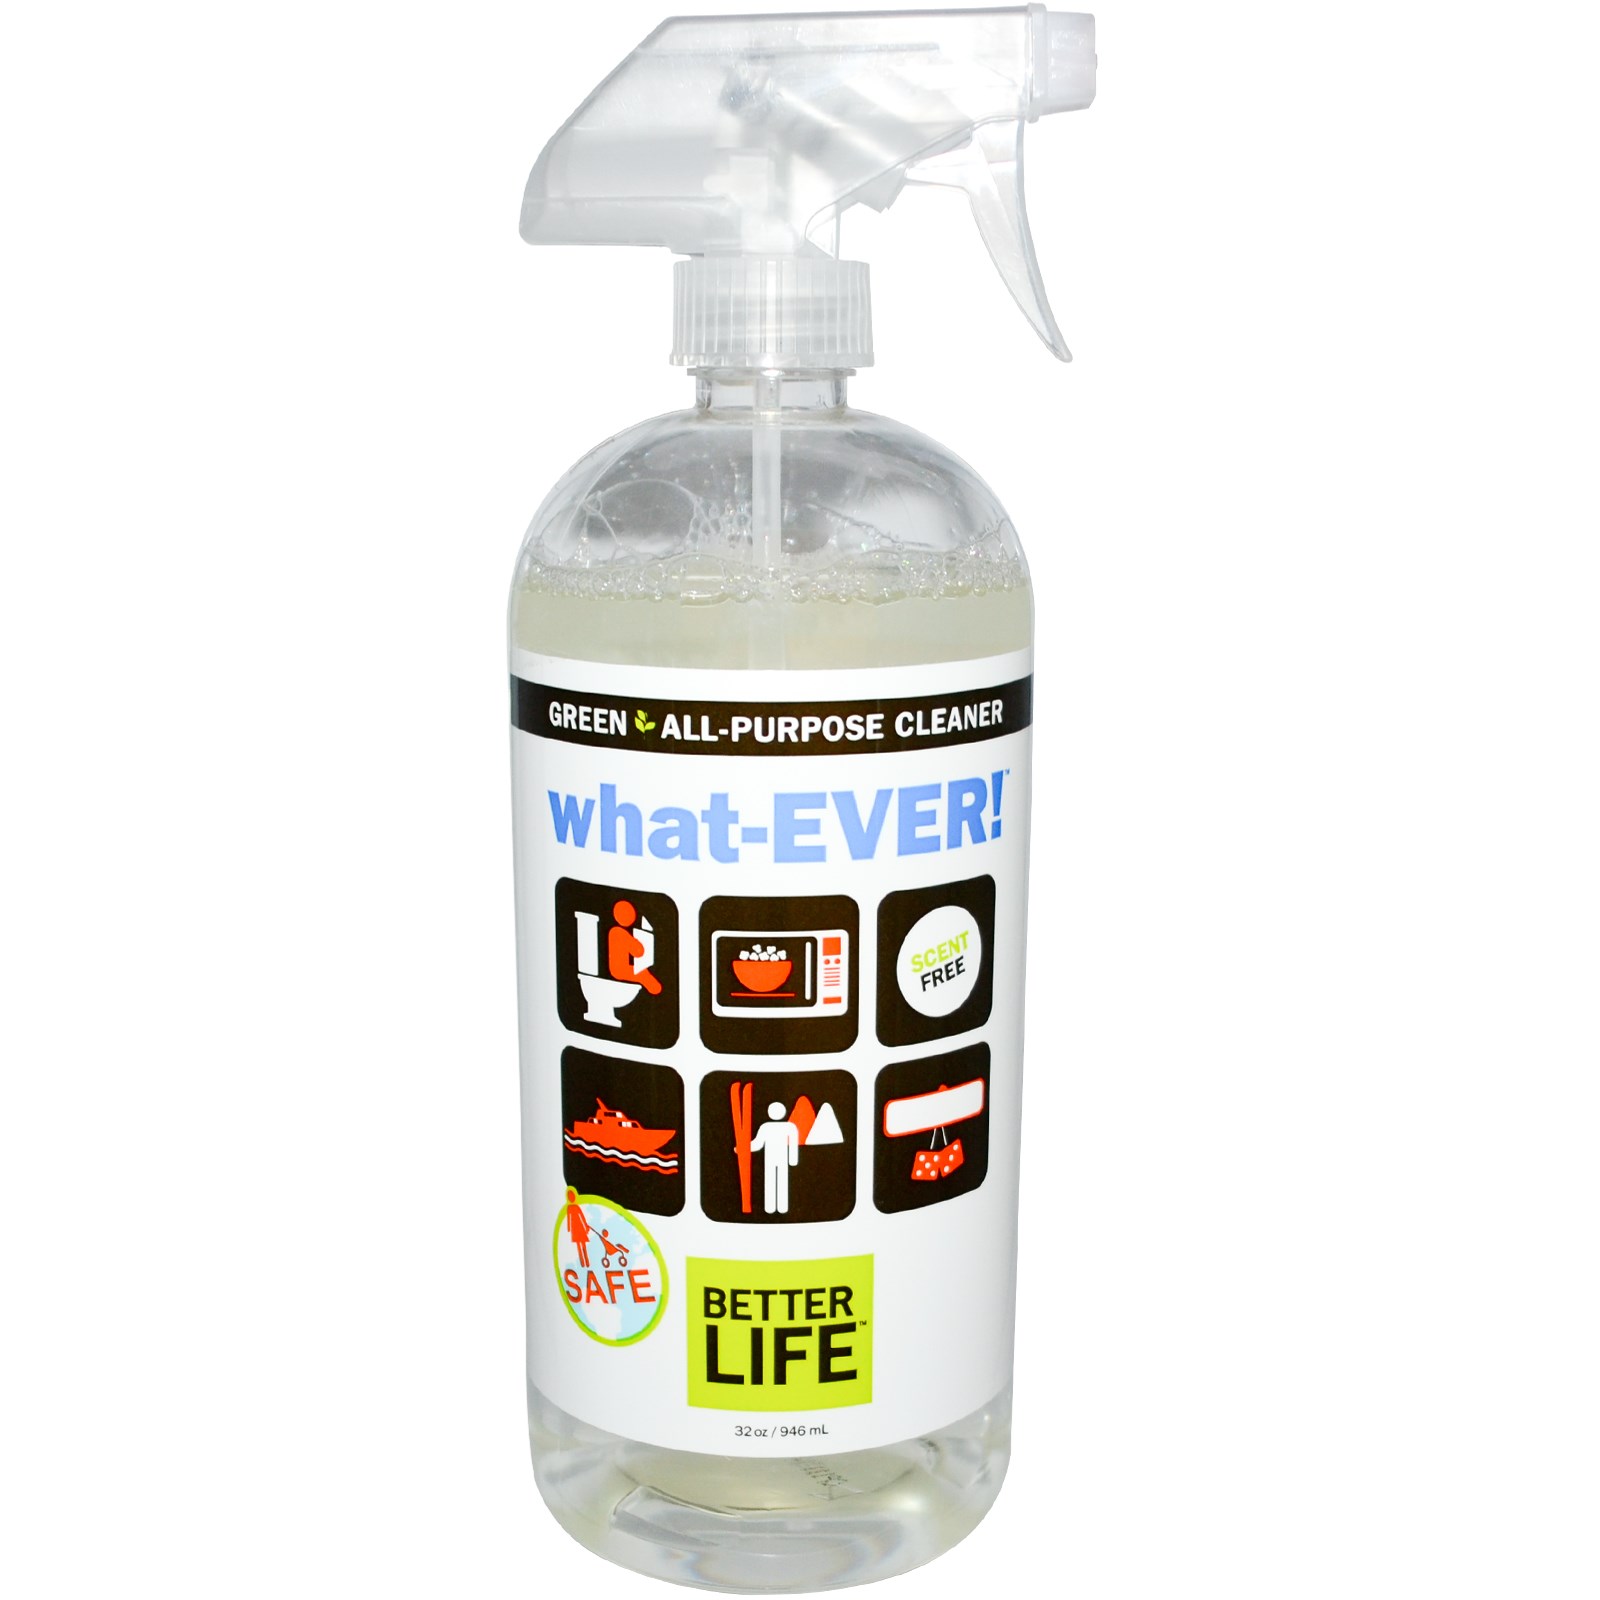 Clean up well. All purpose Cleaner. Well Cleaner. Detailer all purpose Cleaner синий.